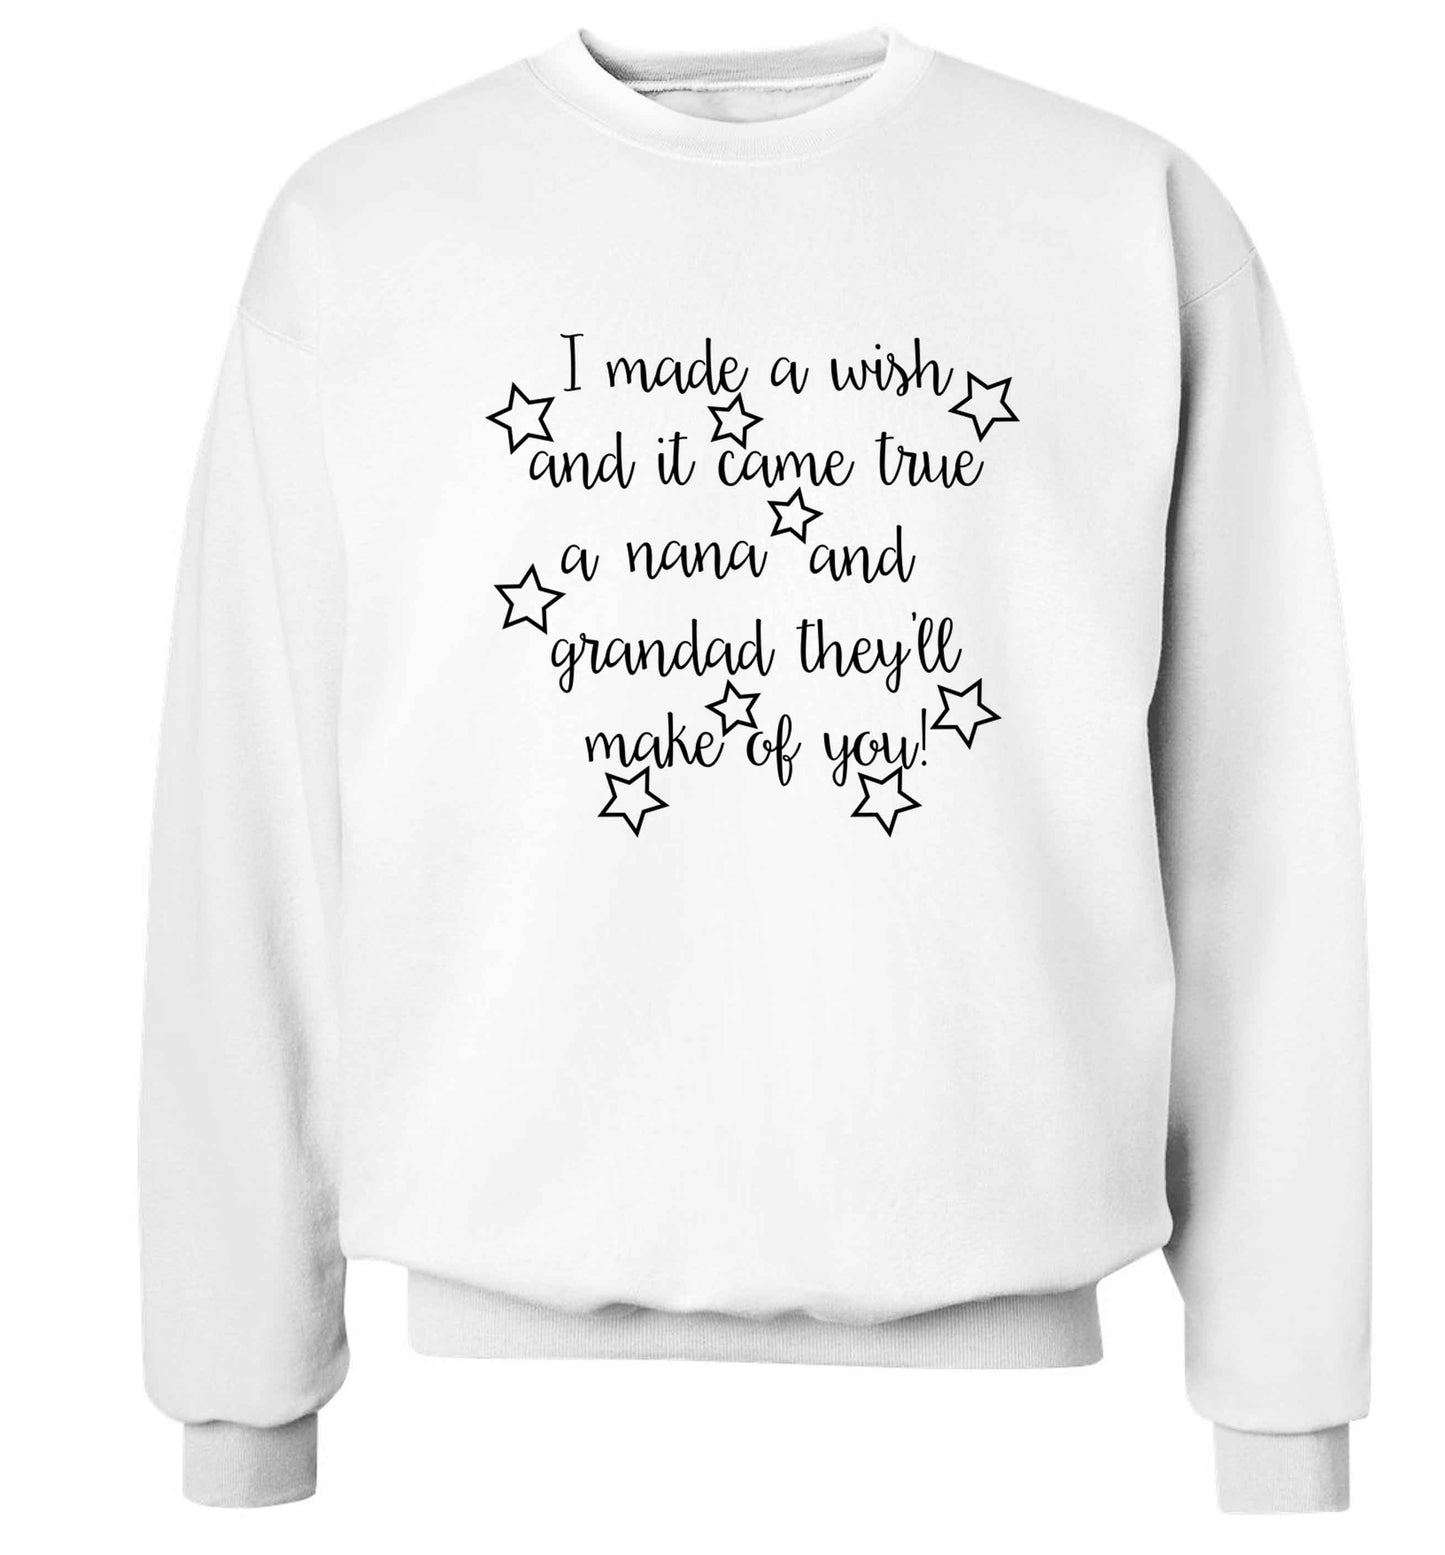 I made a wish and it came true a nana and grandad they'll make of you! Adult's unisex white Sweater 2XL